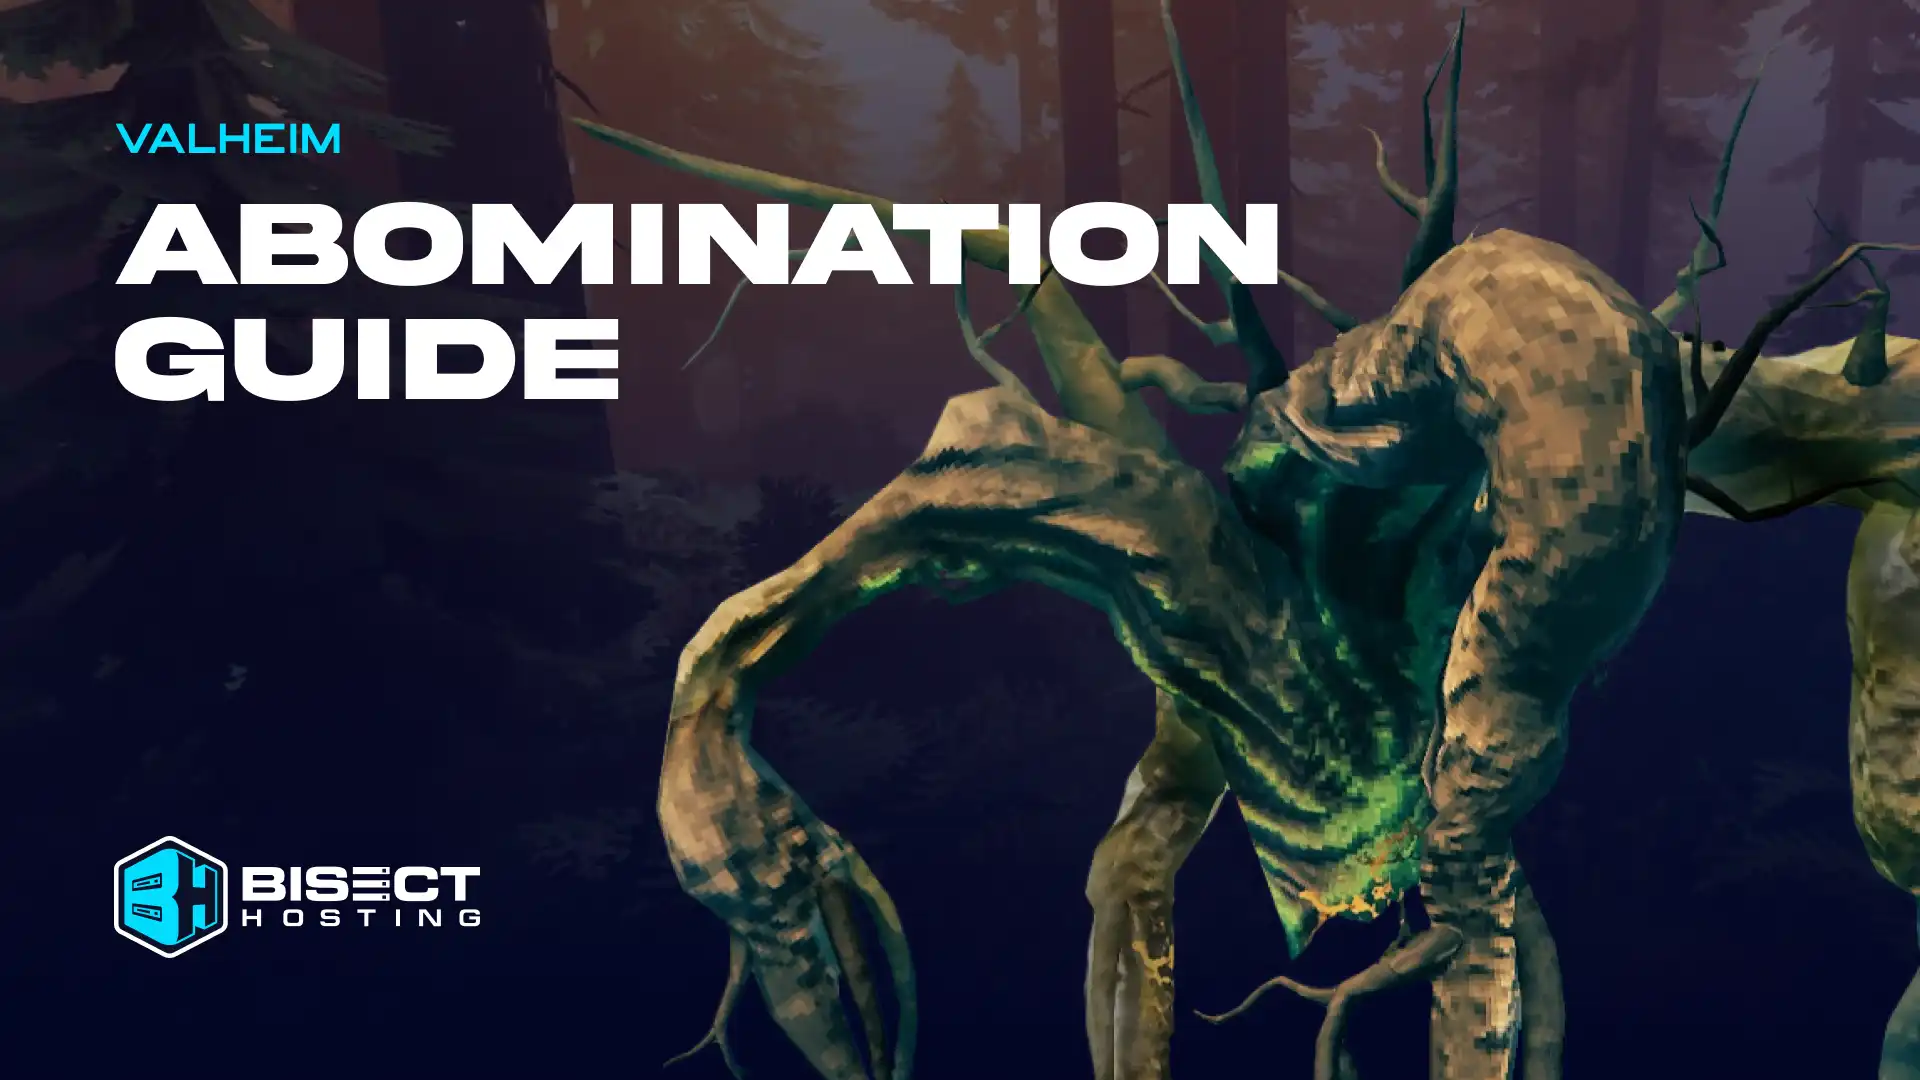 Valheim Abomination Guide: Locations, Weaknesses, & Loot Table